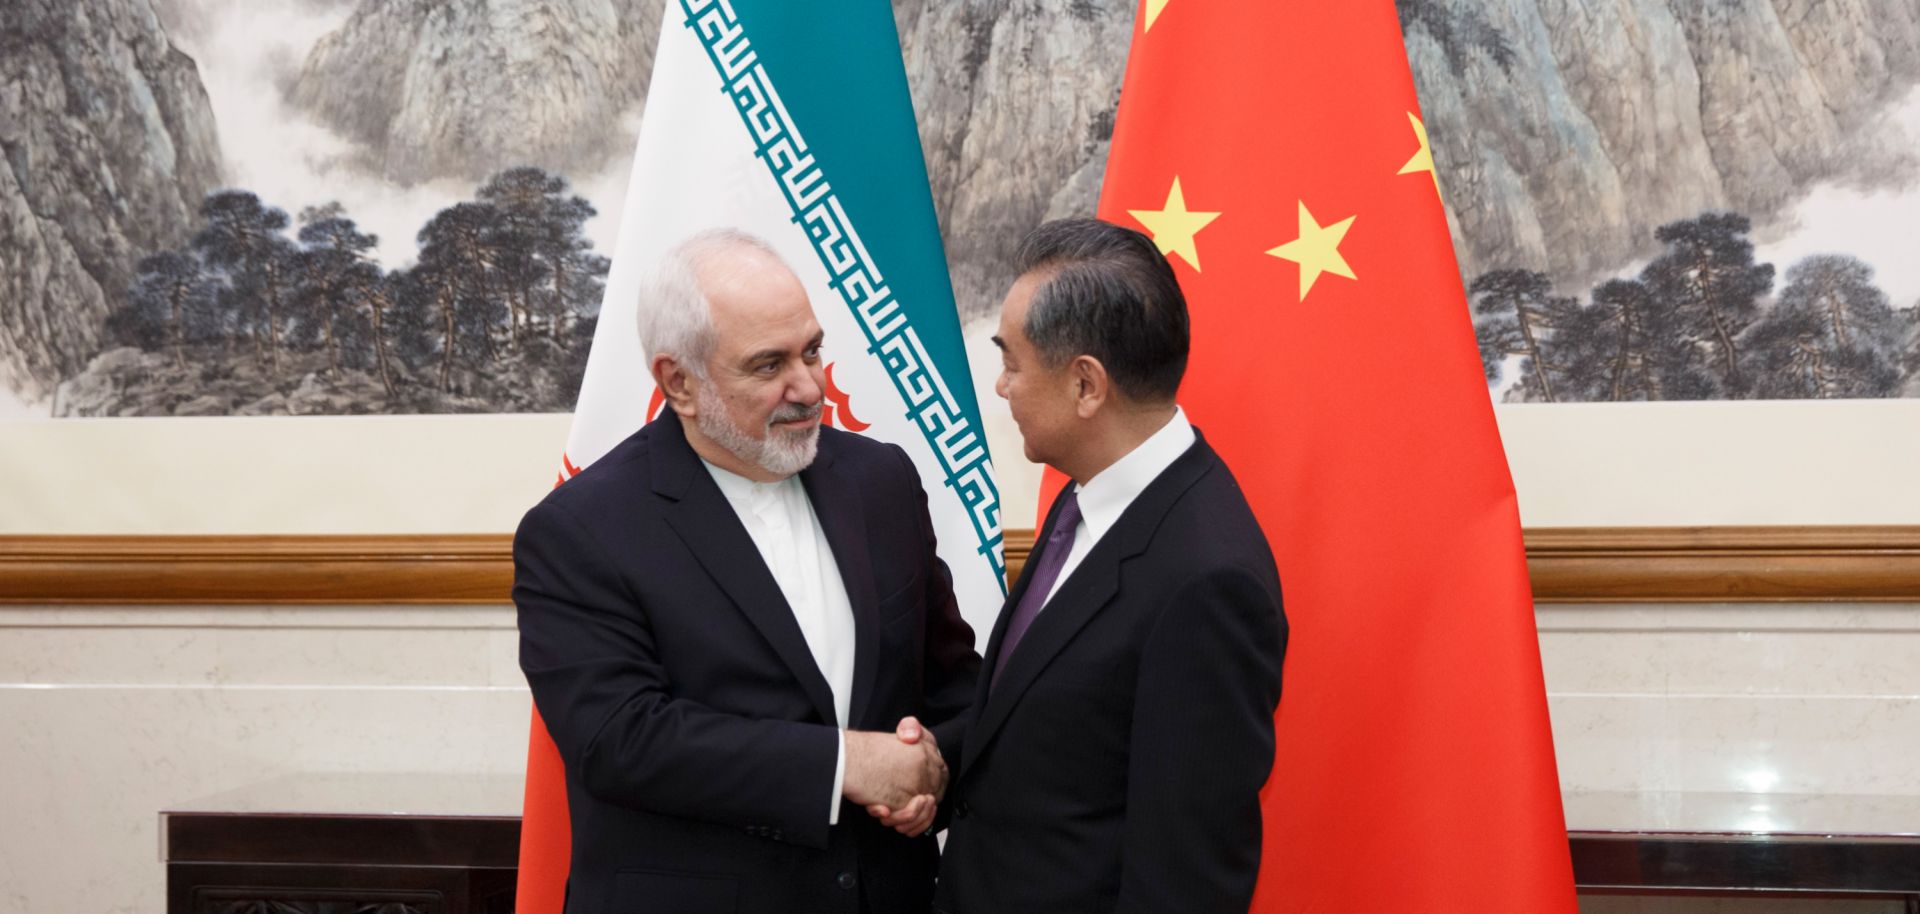 Iranian Foreign Minister Javad Zarif and Chinese Foreign Minister Wang Yi meet in Beijing on May 17, 2019.